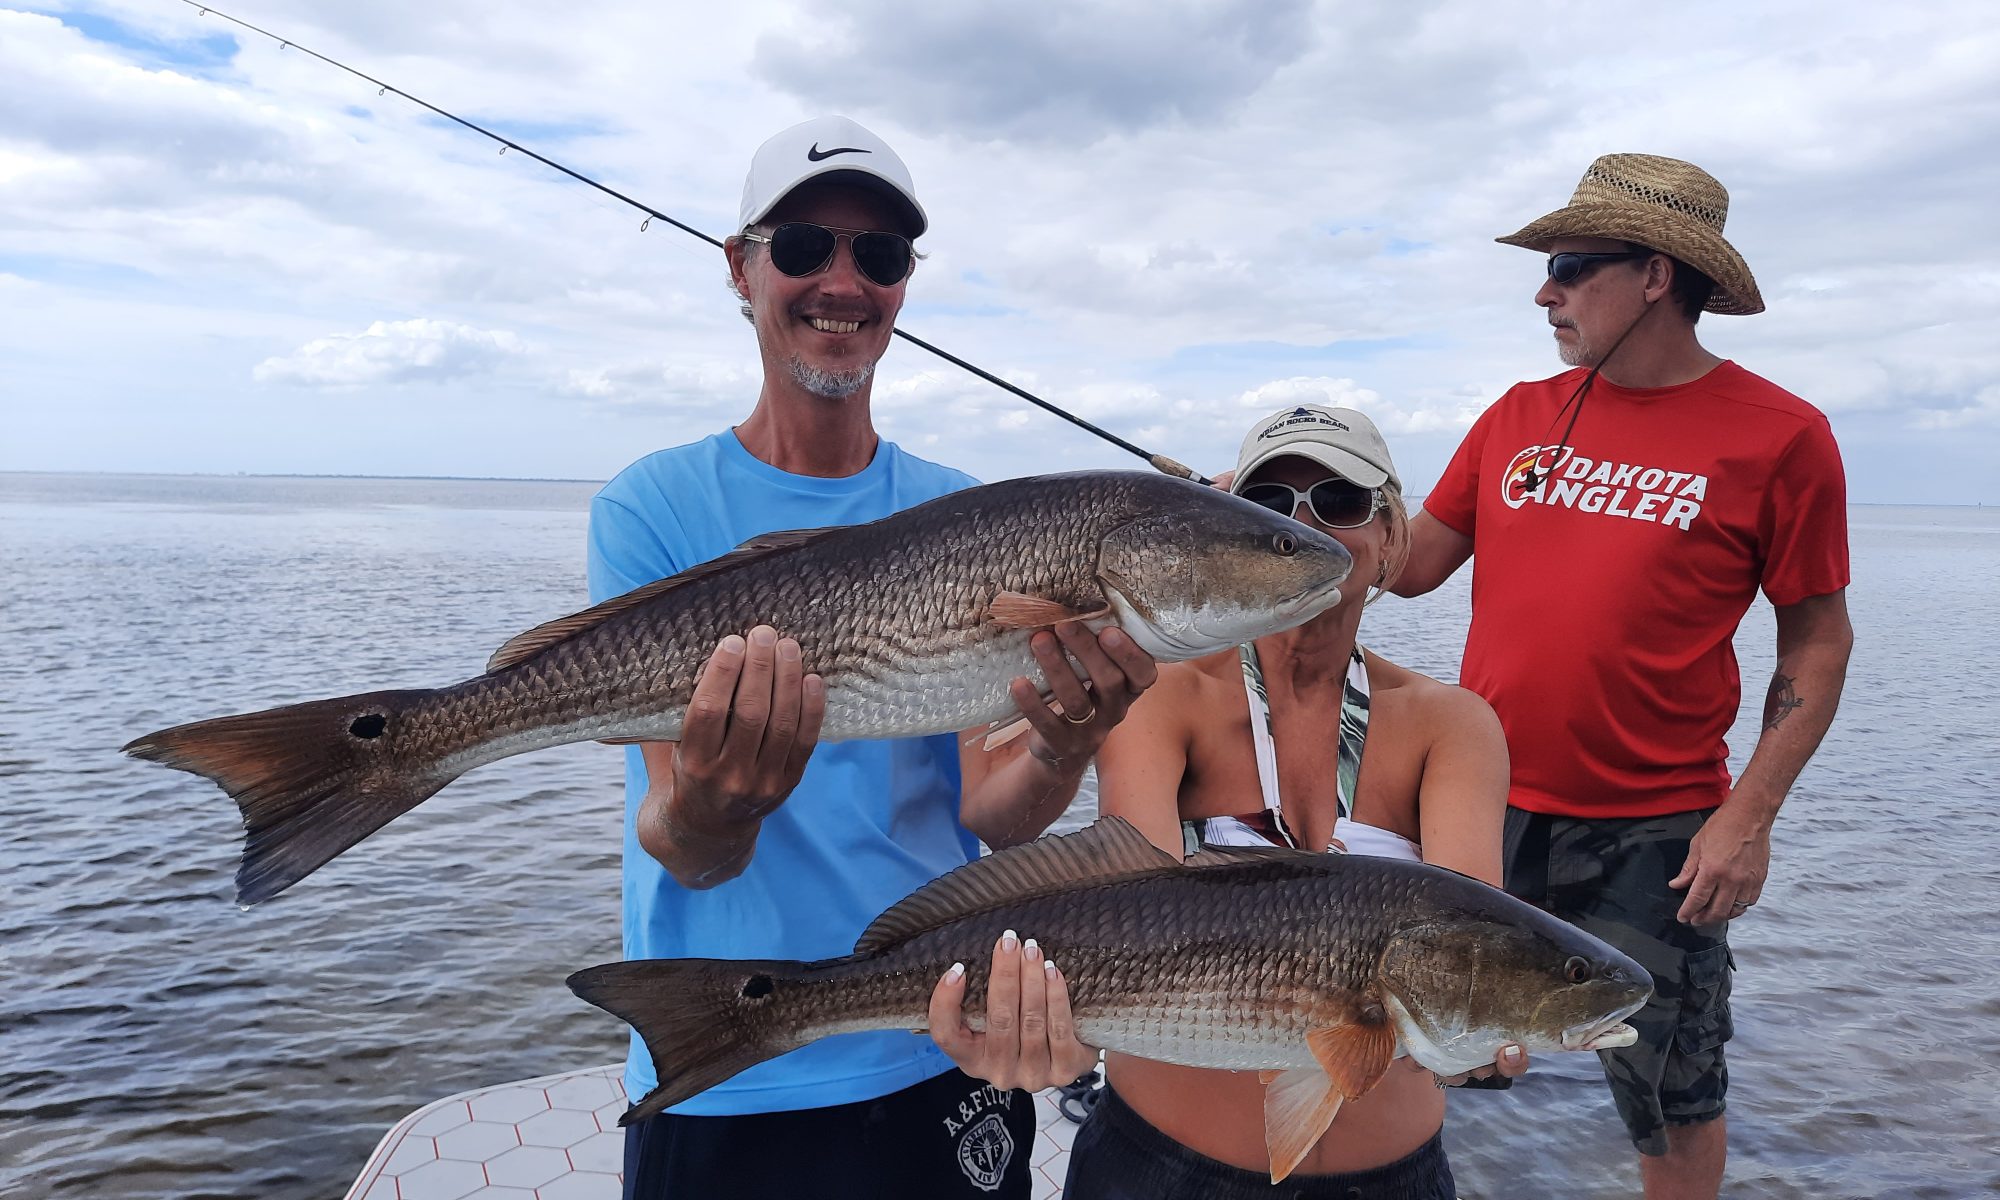 Warmer temperatures in Tampa Bay make for some awesome fishing!